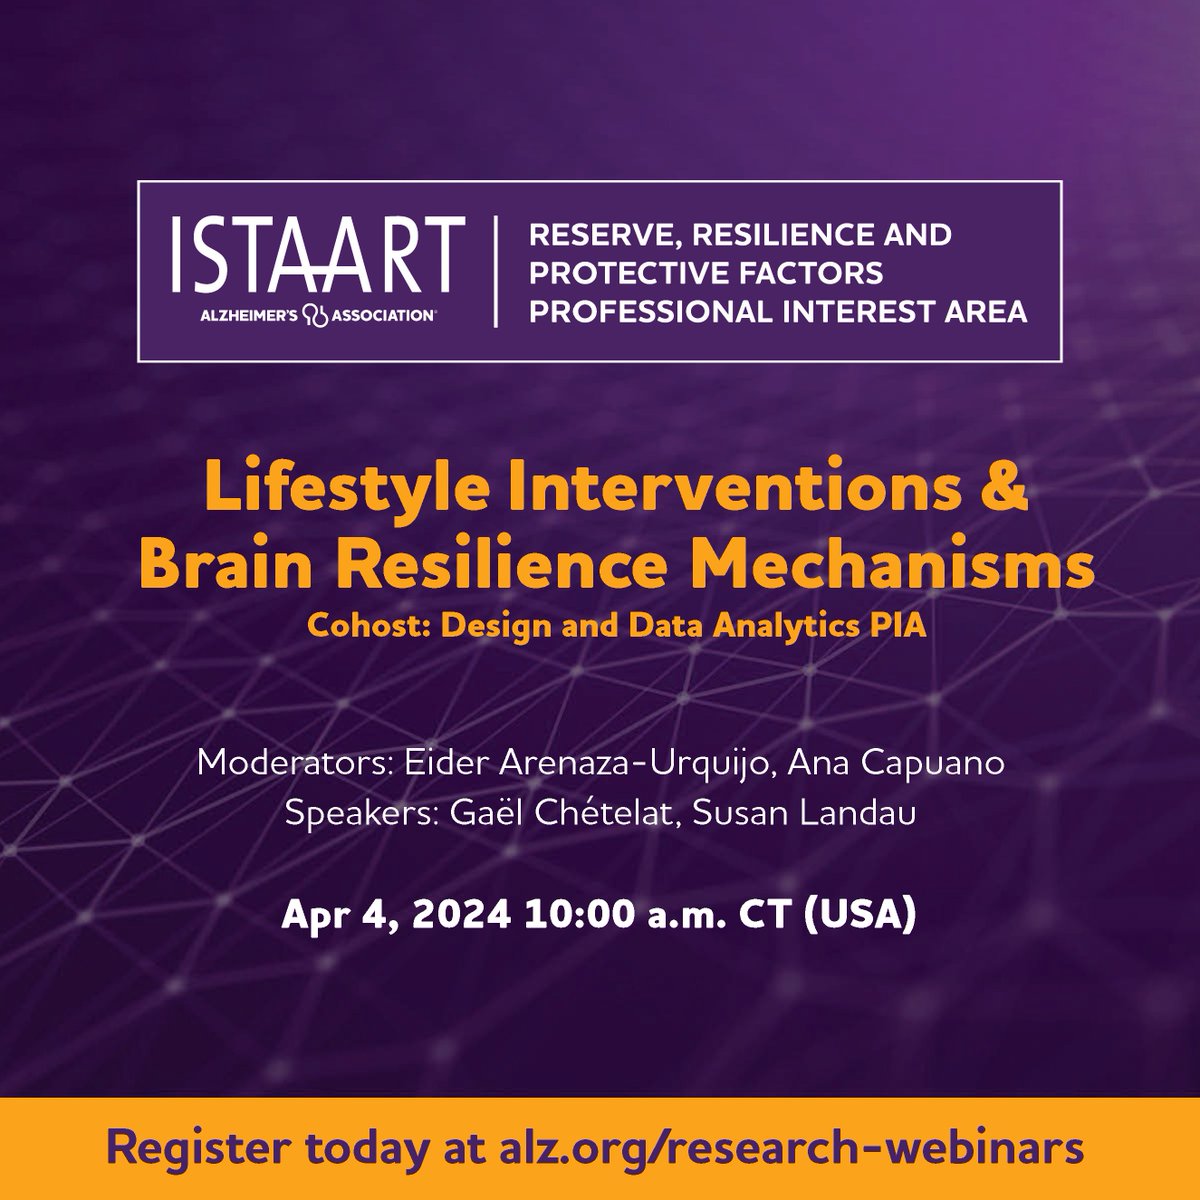 🚨 WEBINAR ALERT Join the @DesignDataPIA and the @ReservePIA to dive into the effects of lifestyle interventions on brain health in aging. Data will be shared on MEDITAGEING and on the neuroimaging study of USPOINTER. To register for the live event alz-org.zoom.us/webinar/regist…